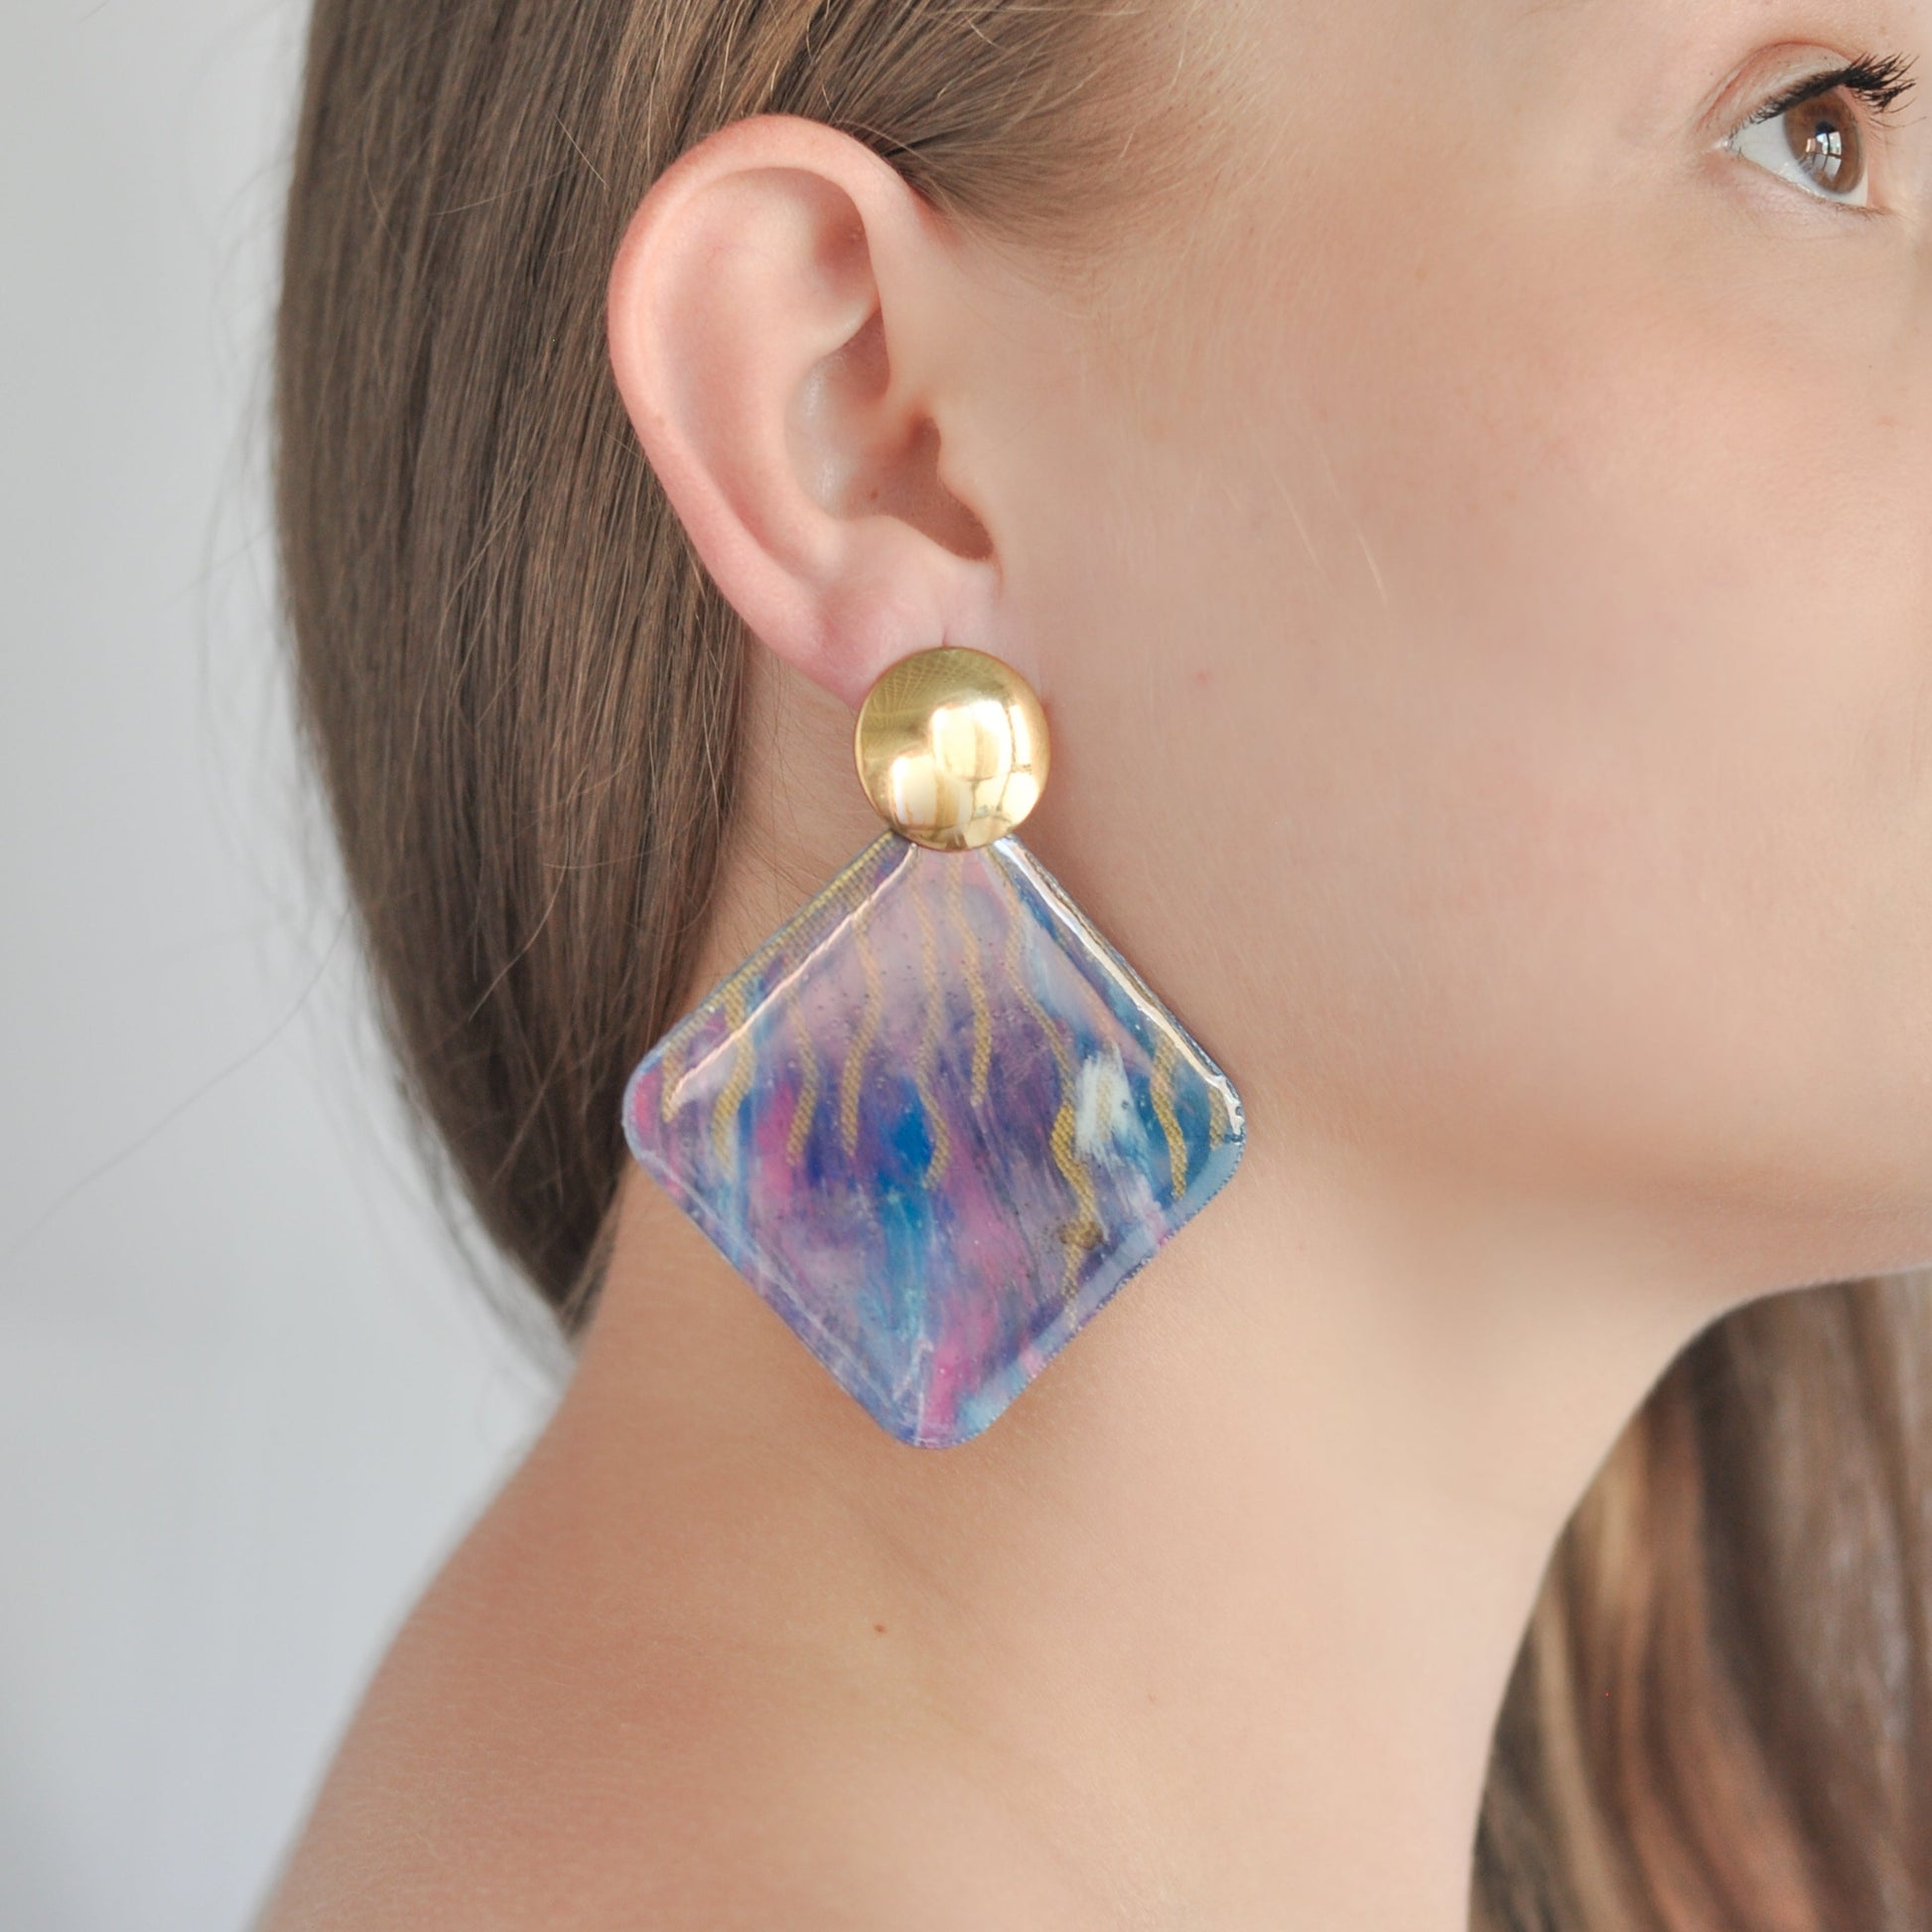 Recycled bottle tops Statement Earrings Handmade in London Ethical Jewellery Pink Purple Blue Gold Squares 